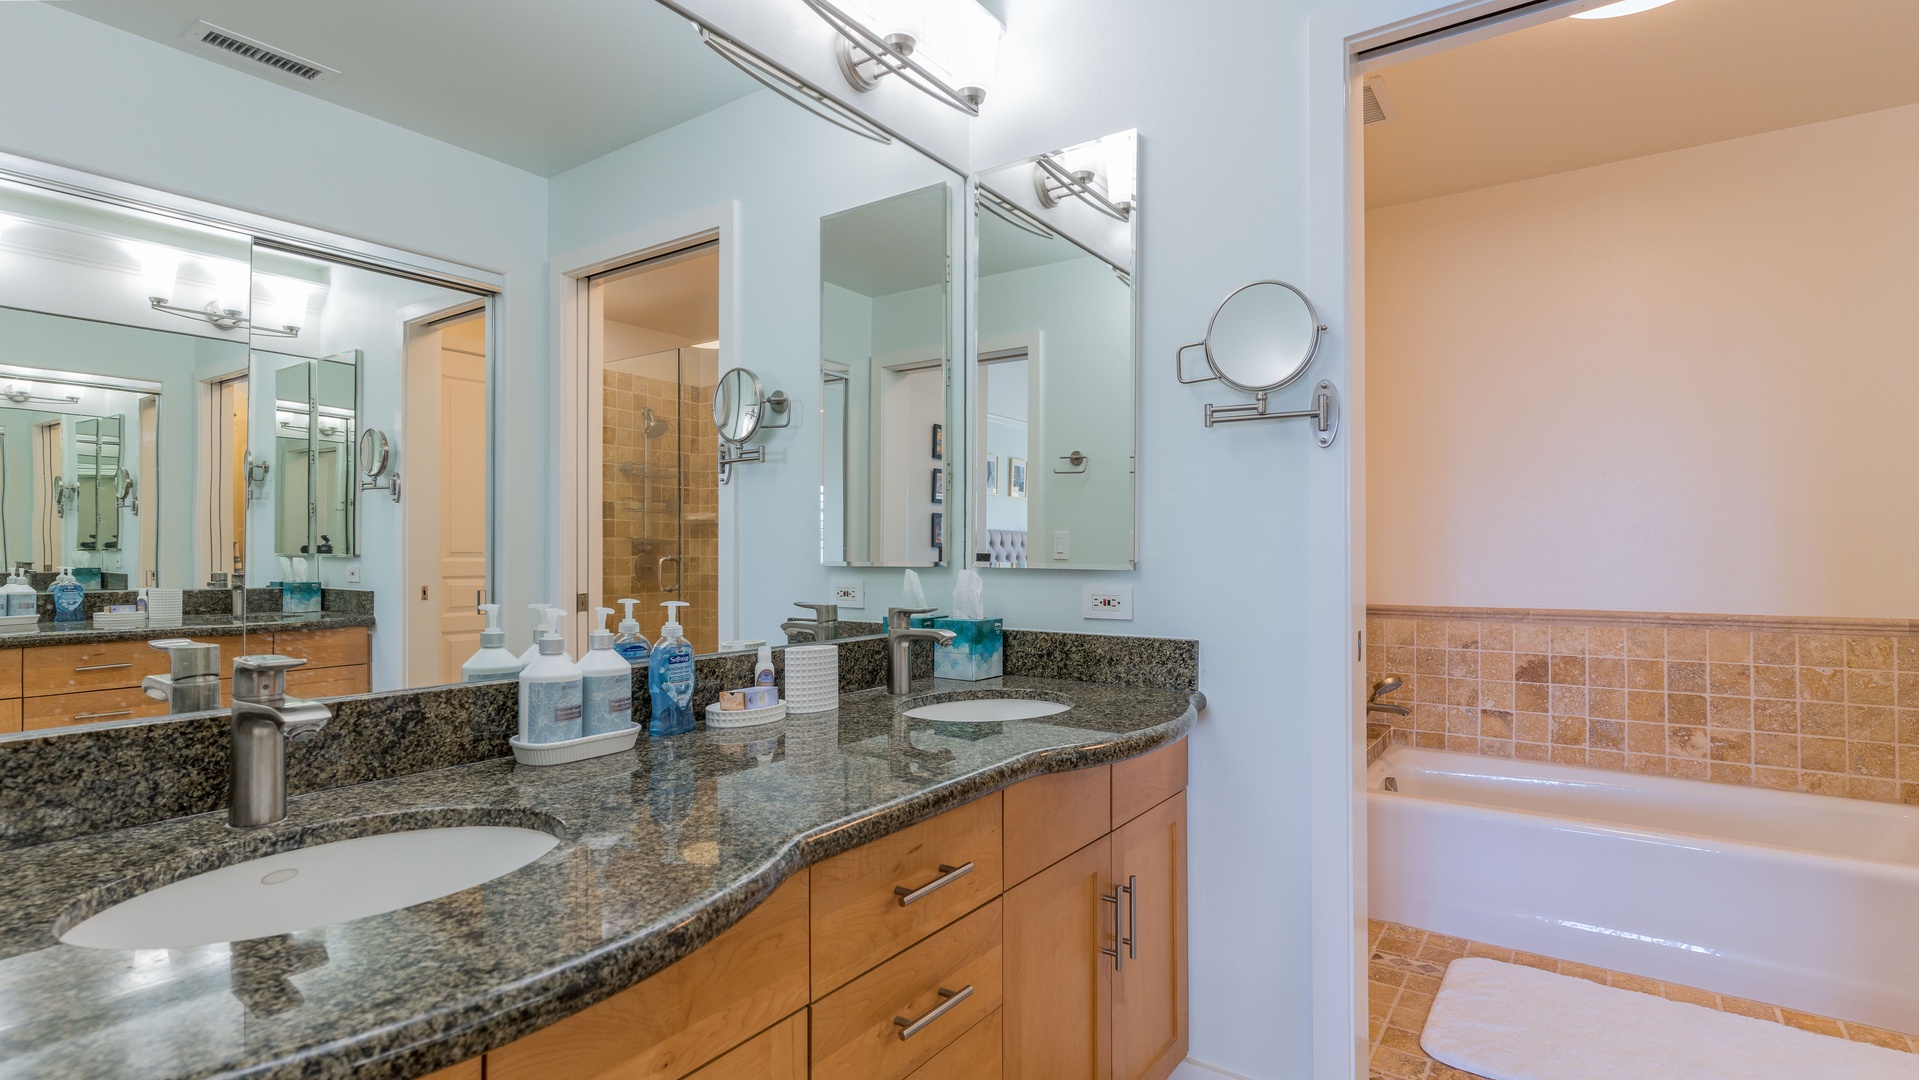 Kapolei Vacation Rentals, Kai Lani 21C - The primary guest bathroom features a double vanity and ample lighting.